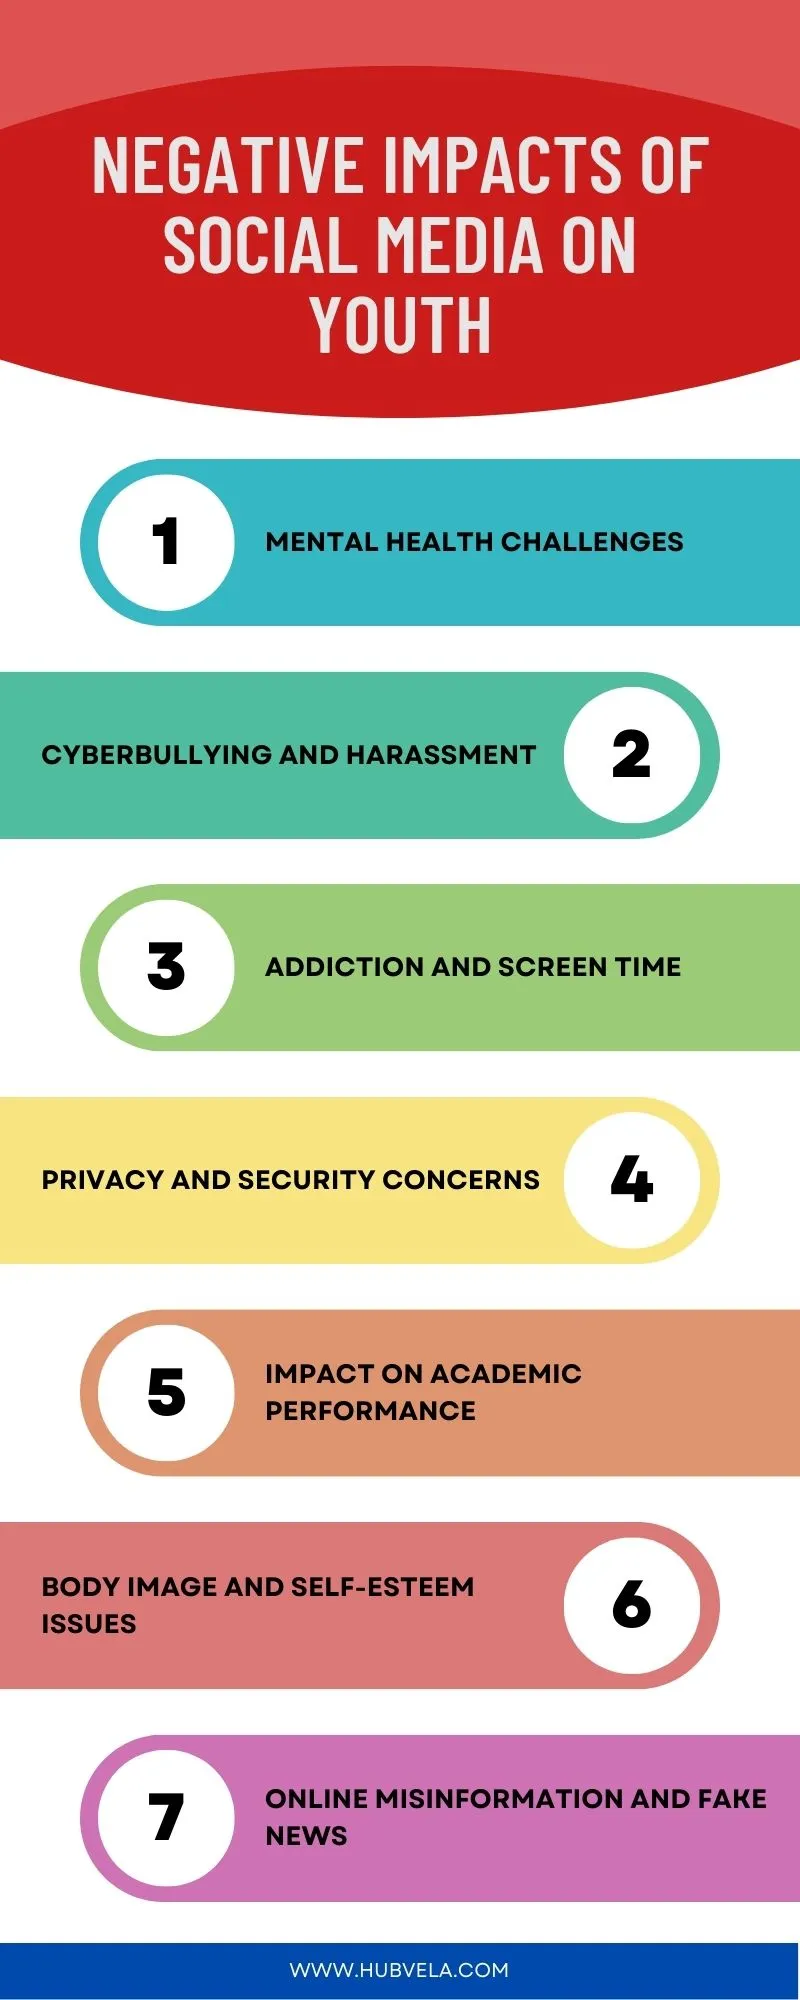 Negative Impacts of Social Media on Youth Infographic